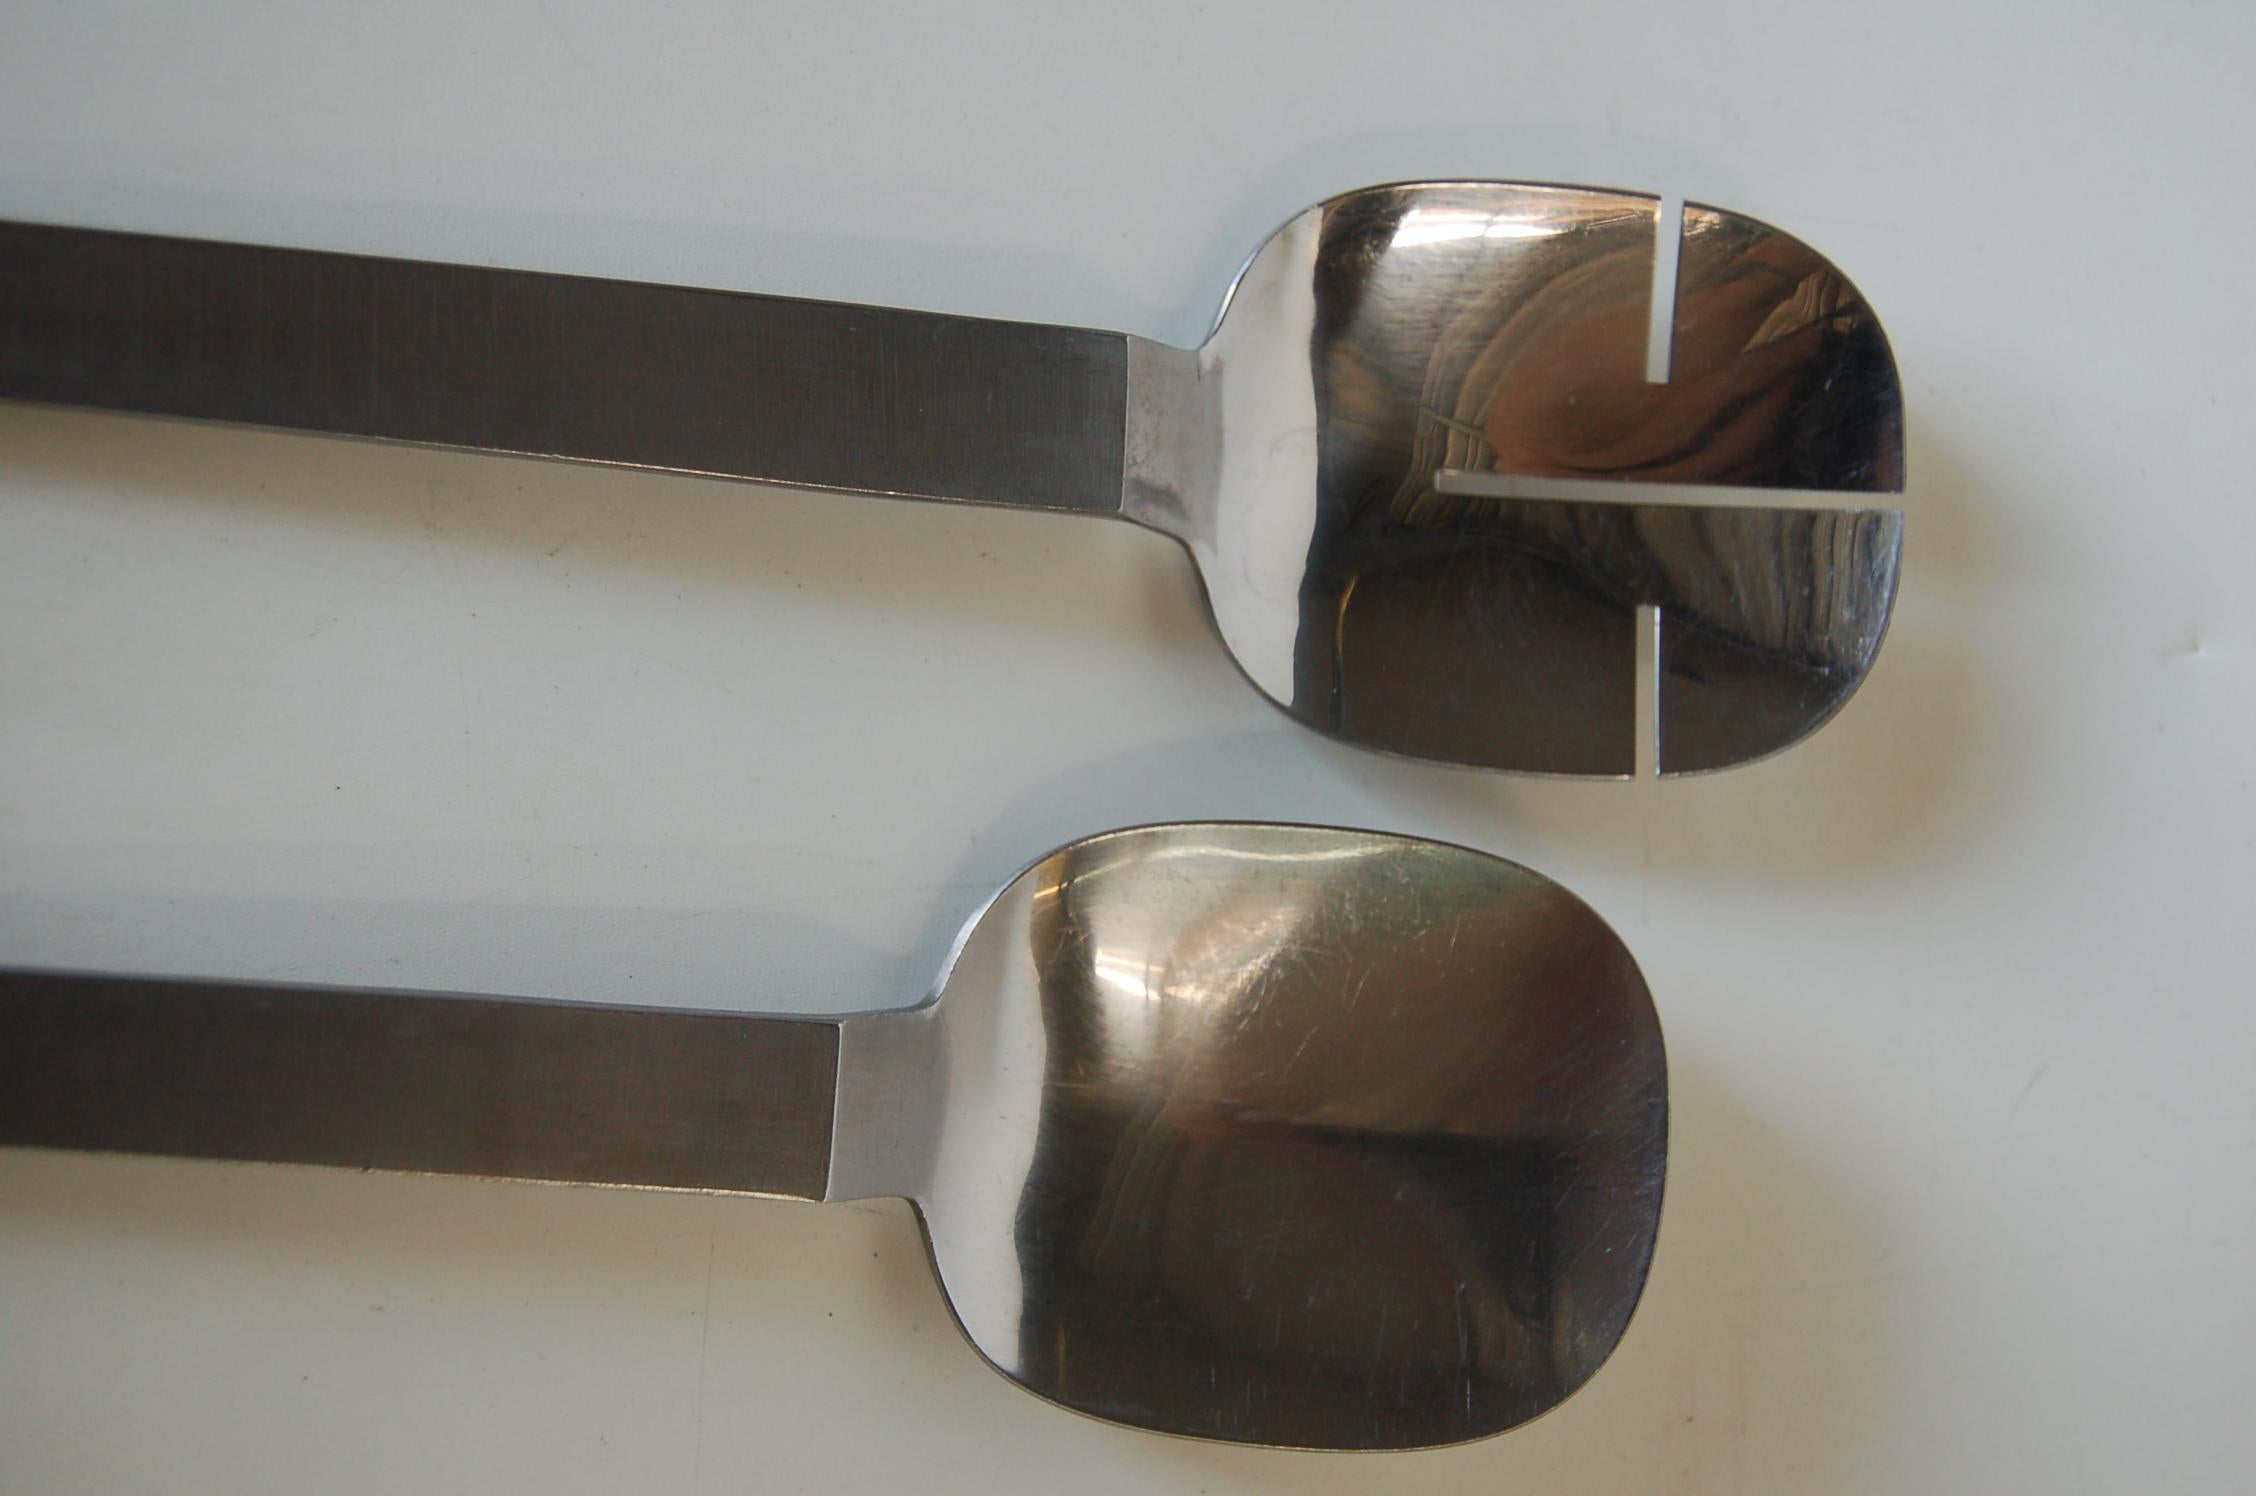 Mid-Century Modern criss cross cutout design in stainless steel. This salad serving utensils set is by Arthur Salm Amboss Austria.

Measures 10